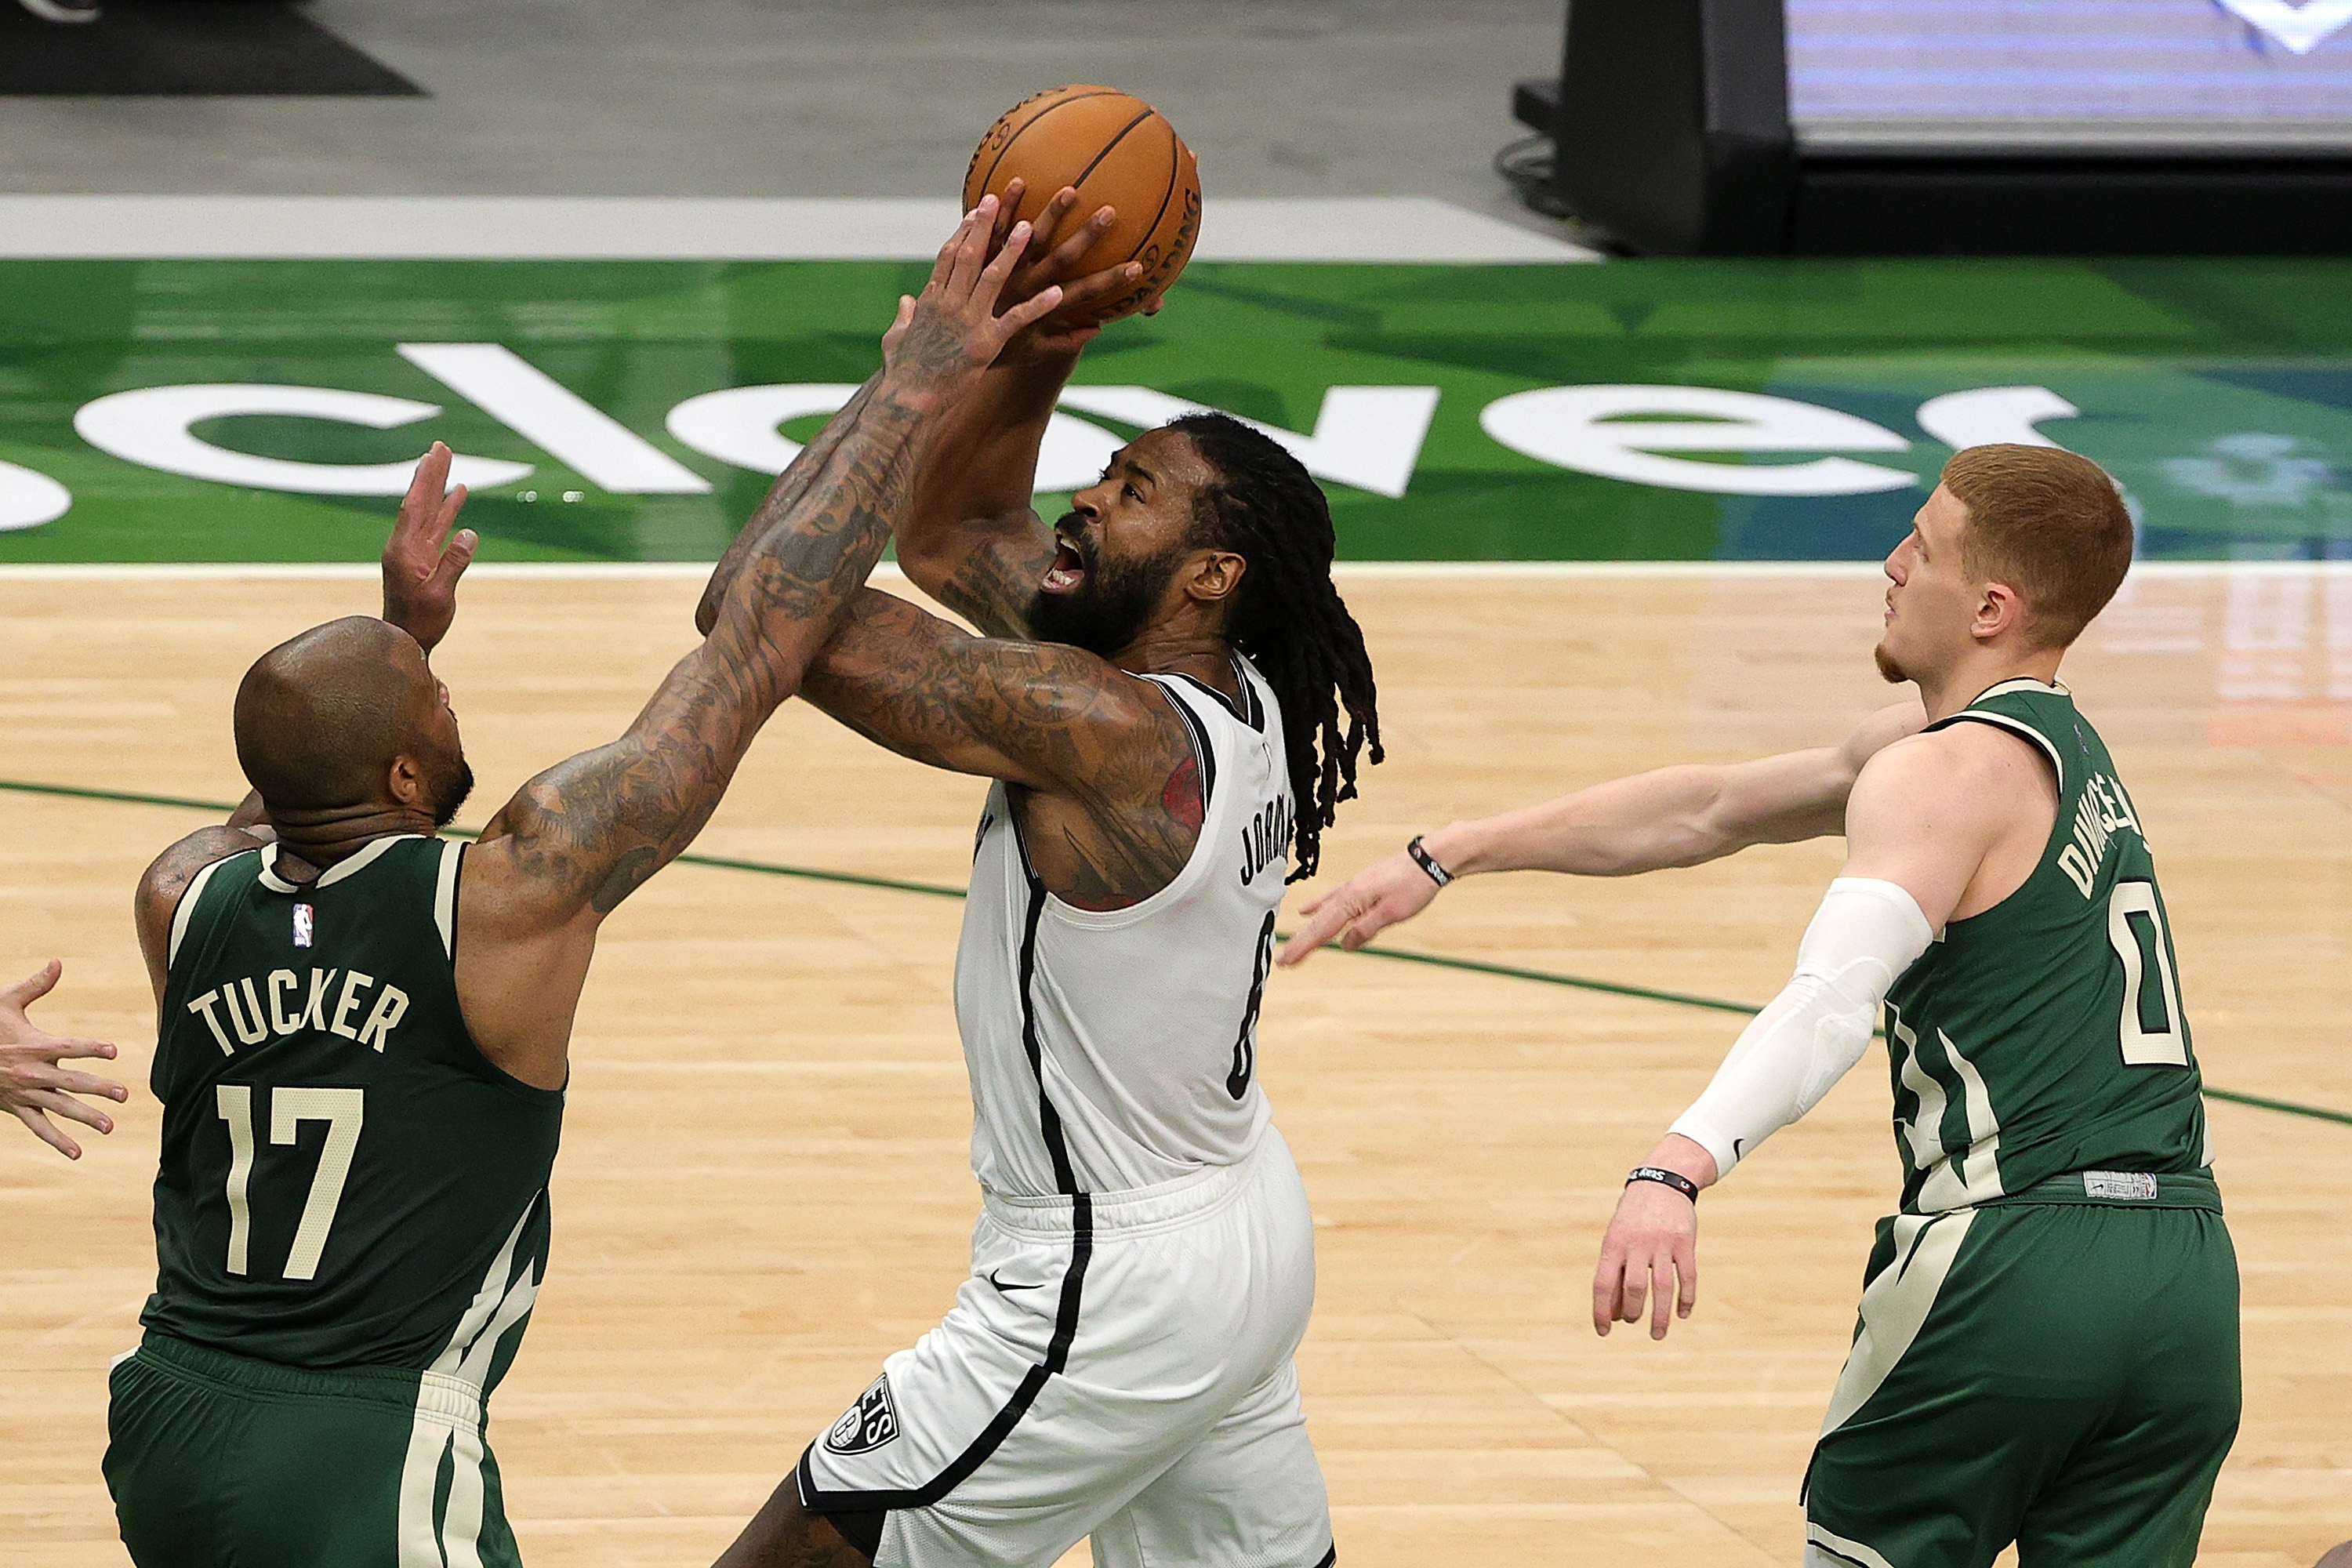 DeAndre Jordan of the Brooklyn Nets is defended by P.J. Tucker of the Milwaukee Bucks during the first half of a game at Fiserv Forum on May 02, 2021 in Milwaukee, Wisconsin.